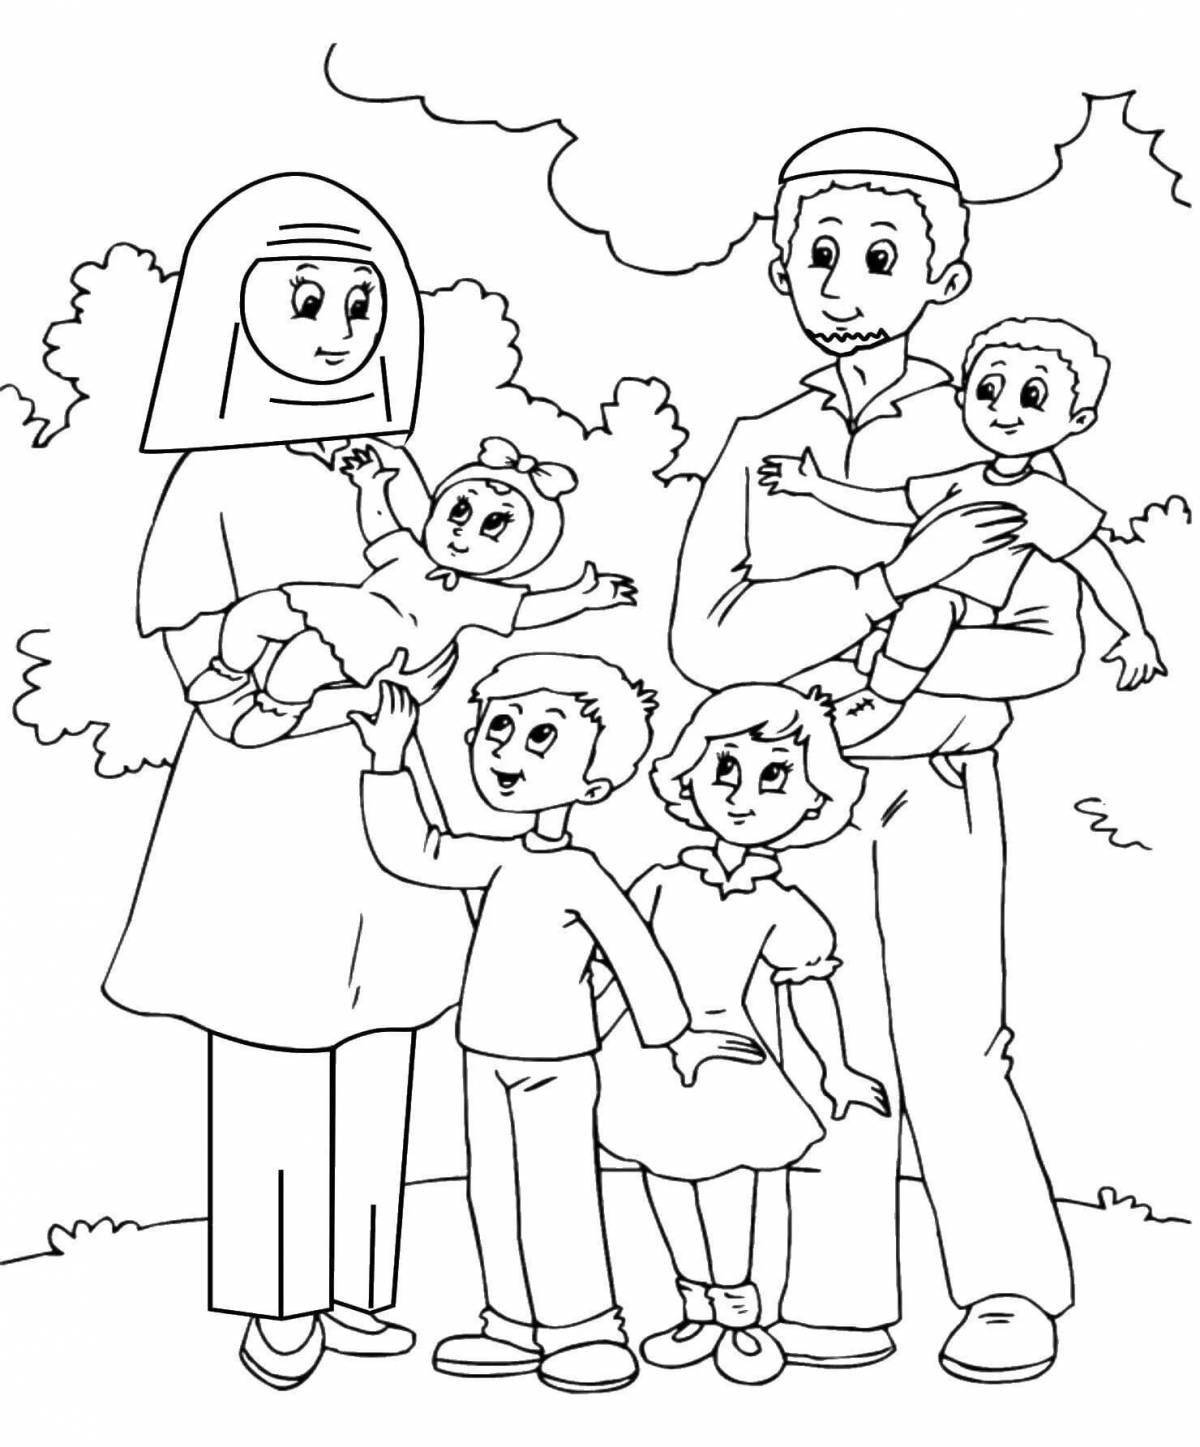 Crazy kickbacks coloring pages for kids